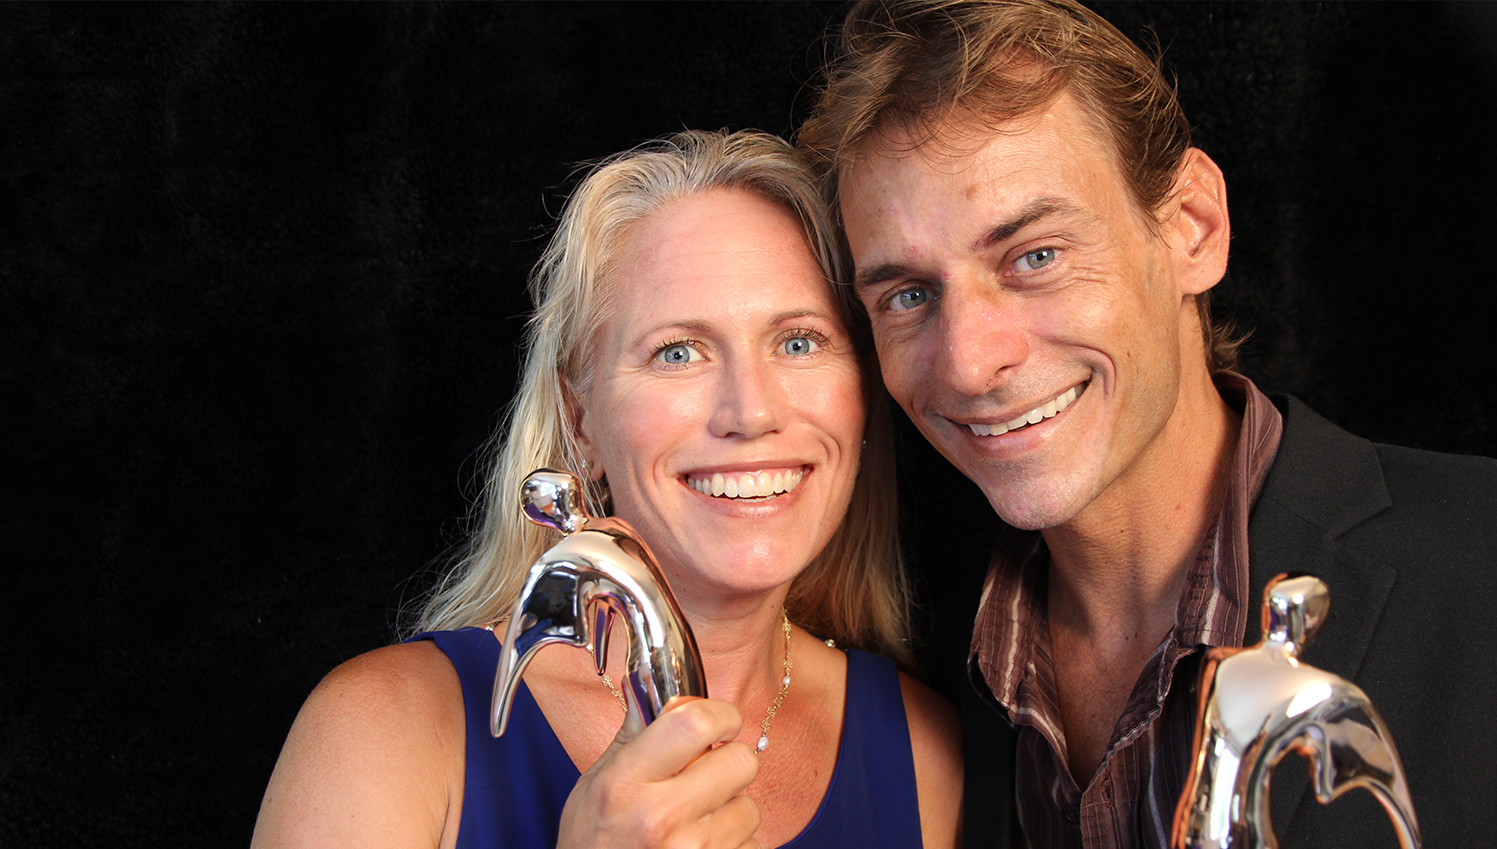 Kanesa and Thor Duncan hold Telly awards after episodes from their TV series Voice of the Sea win.